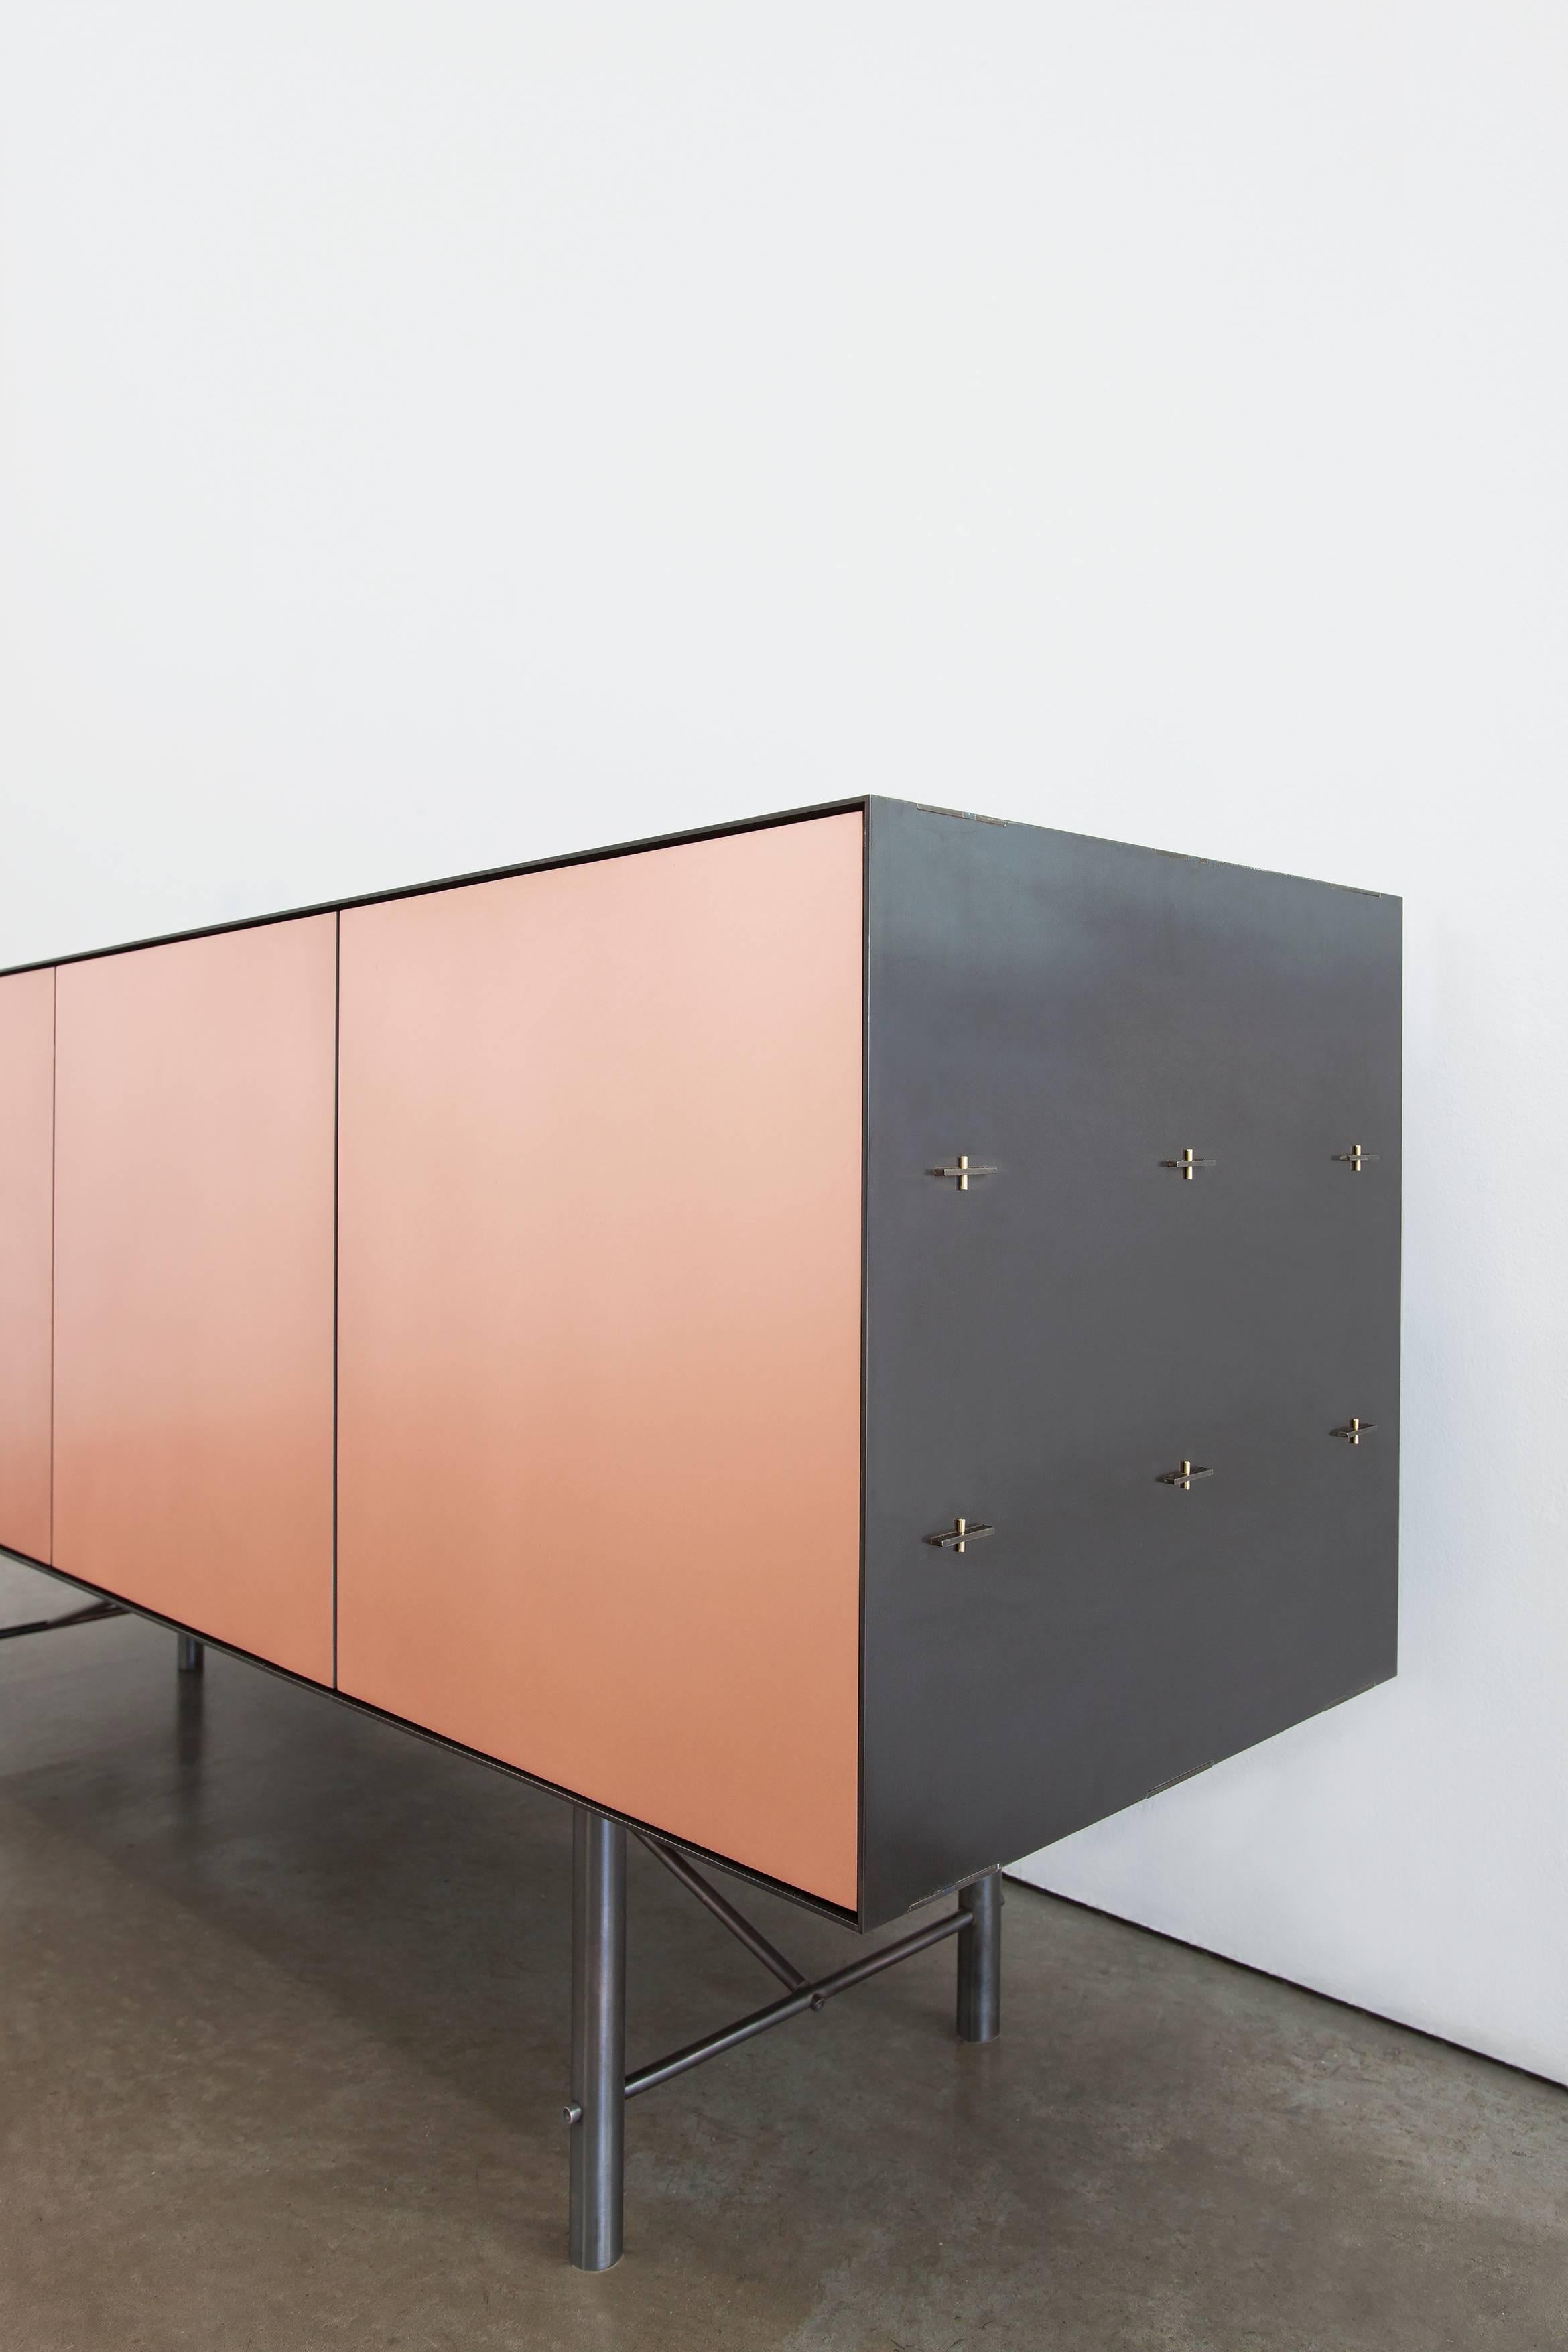 The Connect Credenza is designed to express the process by which each piece is created, with visible construction and fastening details that are integral to the final piece. 

Traditional joinery techniques are used in conjunction with mass